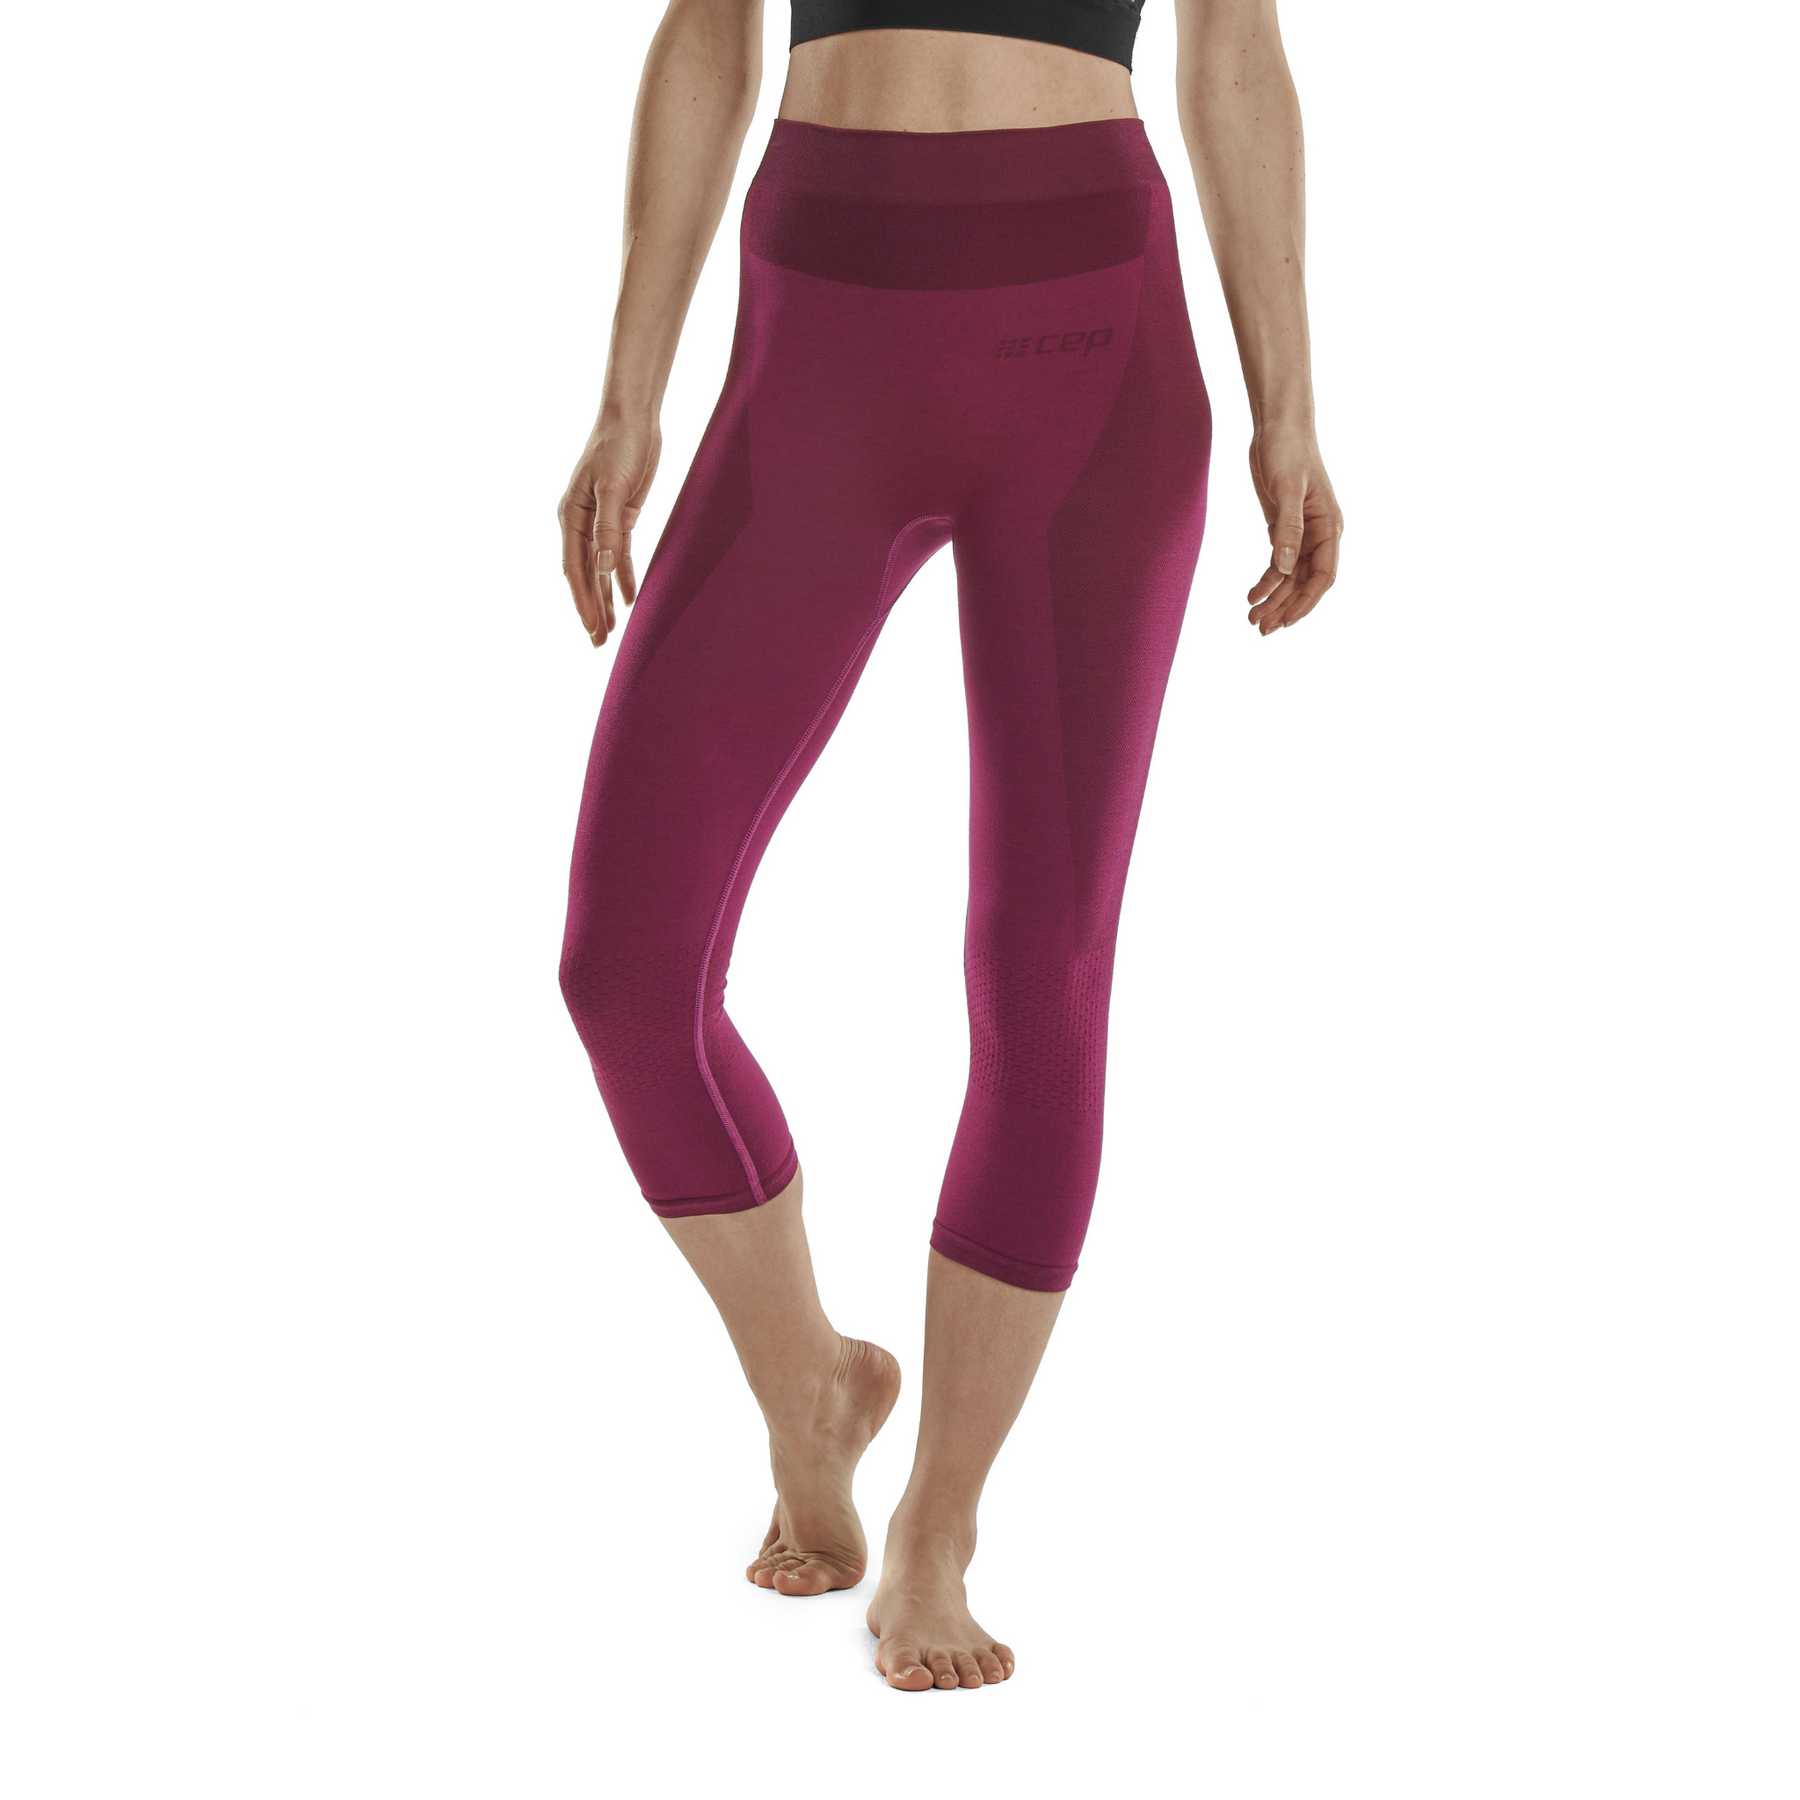 Skins Compression Series-3 Women's 7/8 Tights Burgundy XS